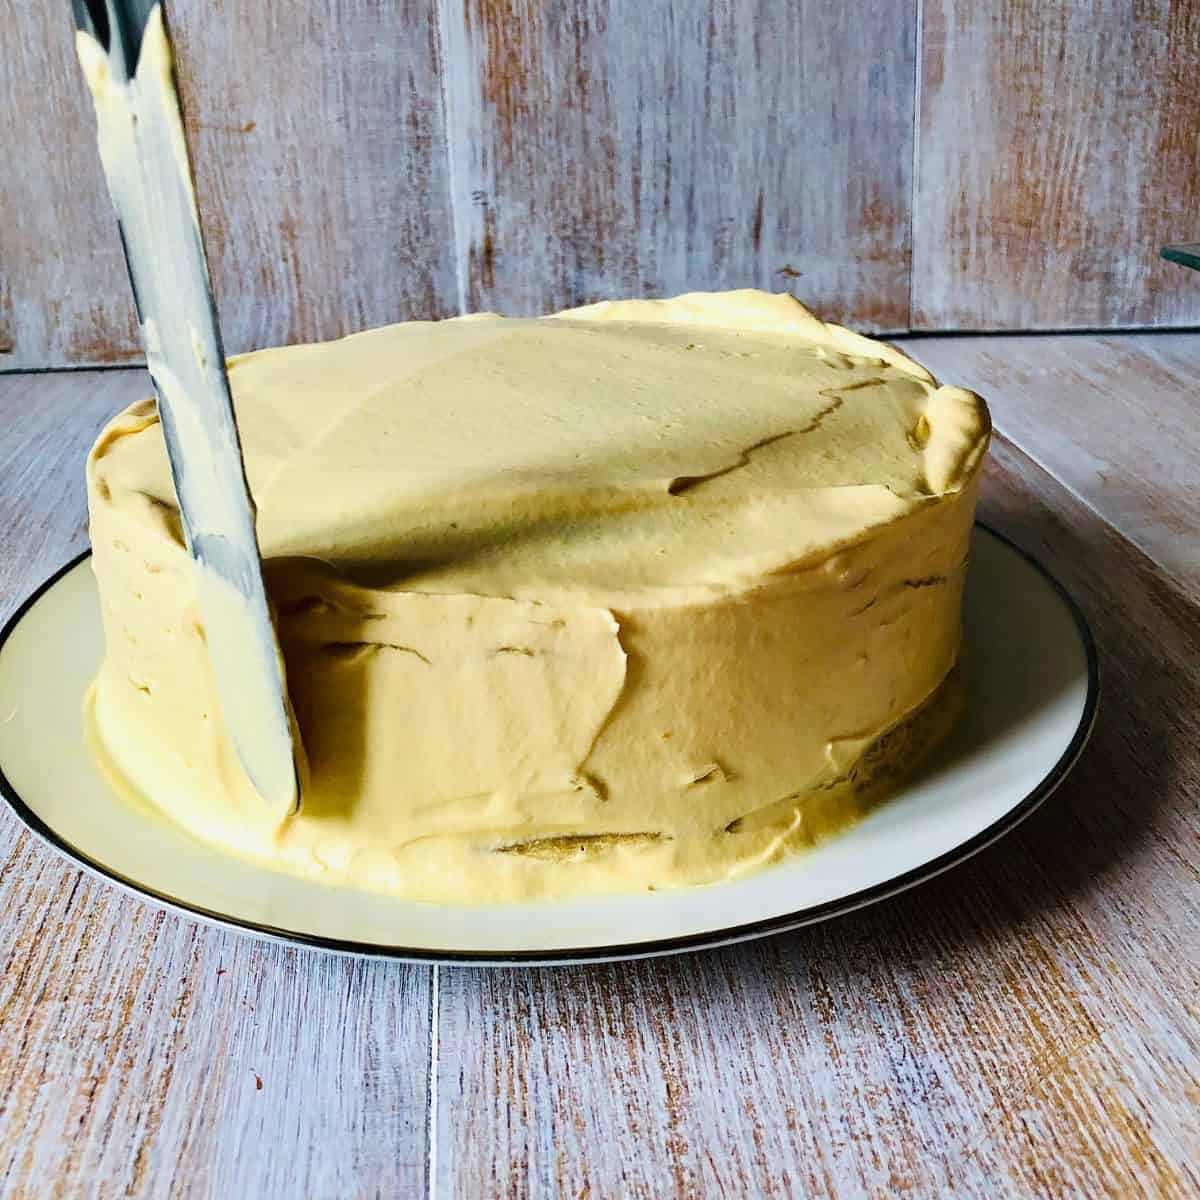 Vegan crepe cake with whipped vegan cream smoothed over the whole surface with a palette knife.